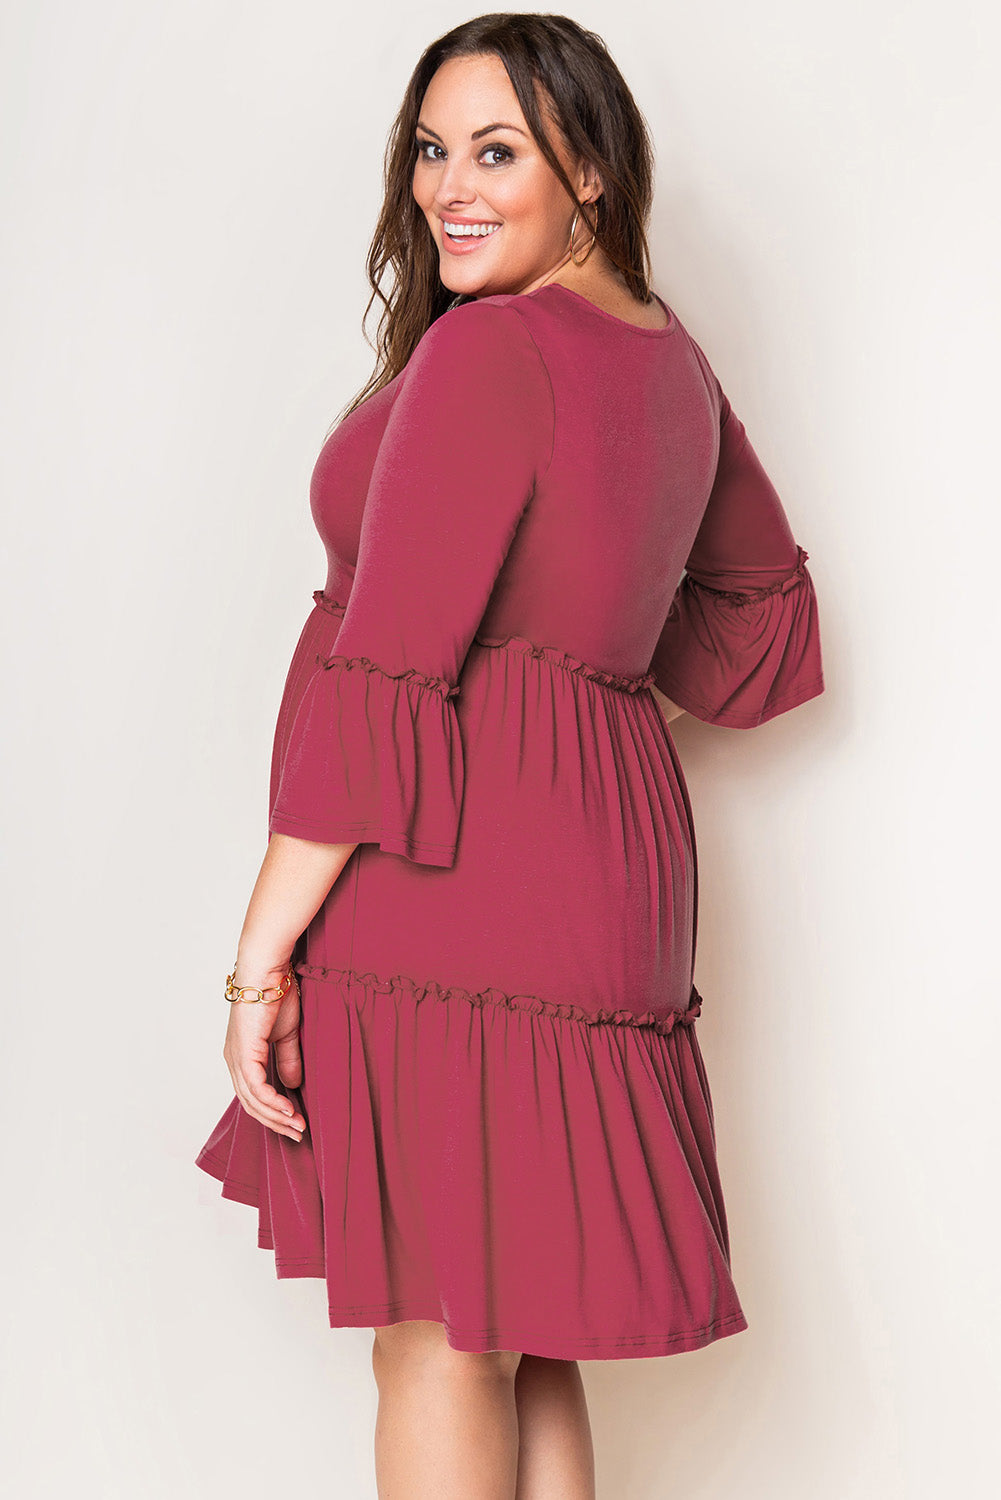 Red Tiered Ruffled 3/4 Sleeve Plus Size Dress